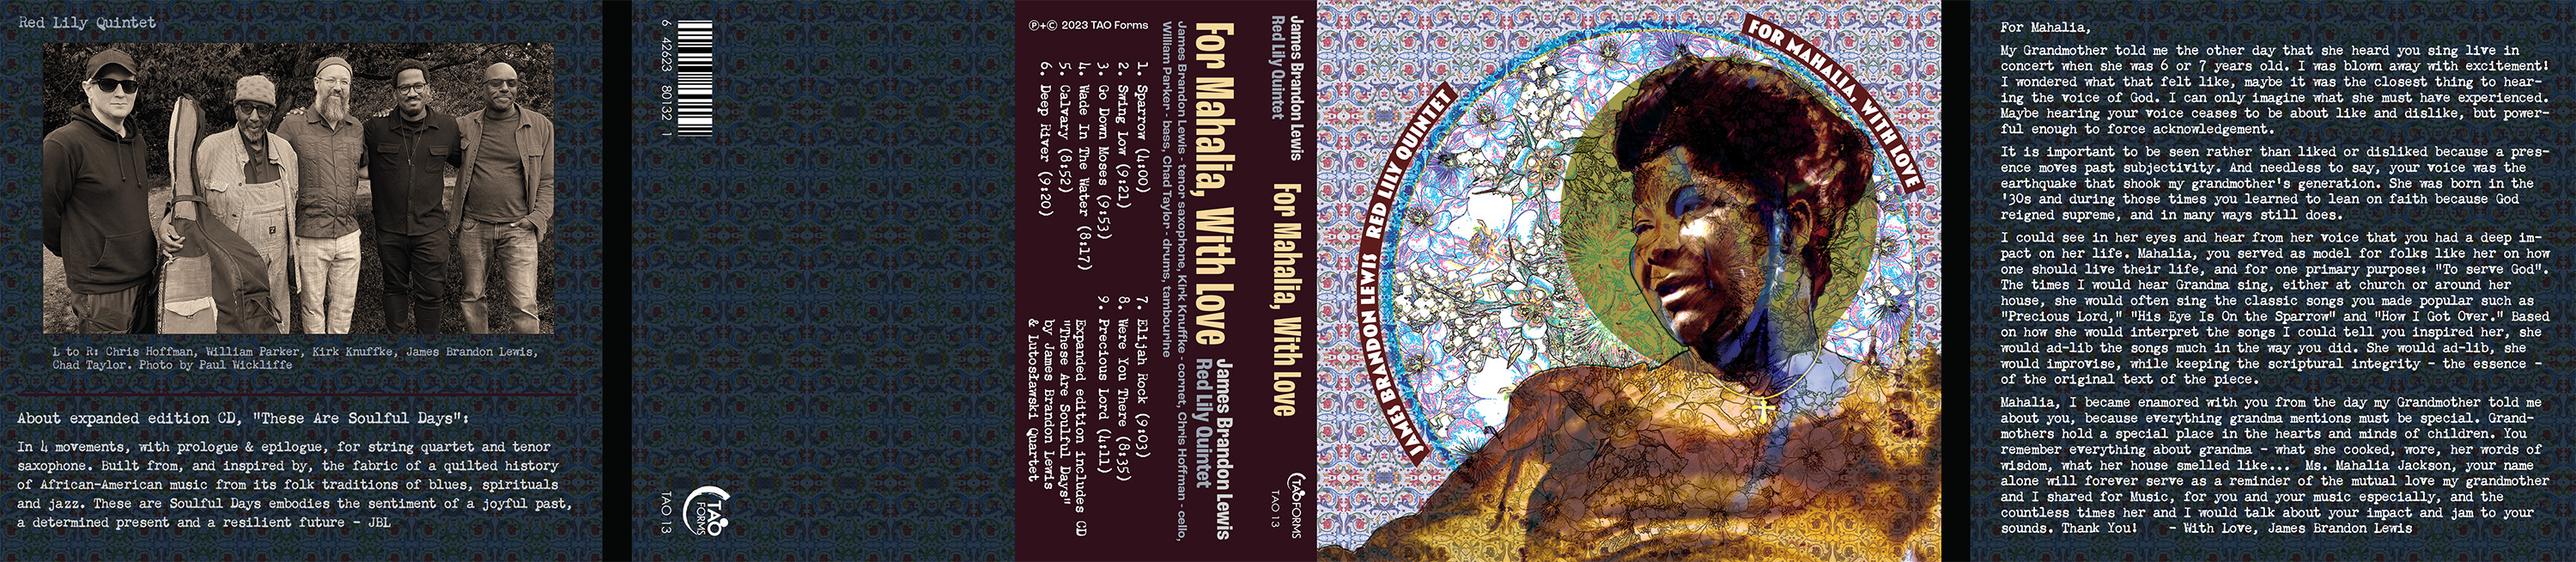 cd cover and outside panels for For Mahalia With Love by James Brandon Lewis Red Lily Quintet